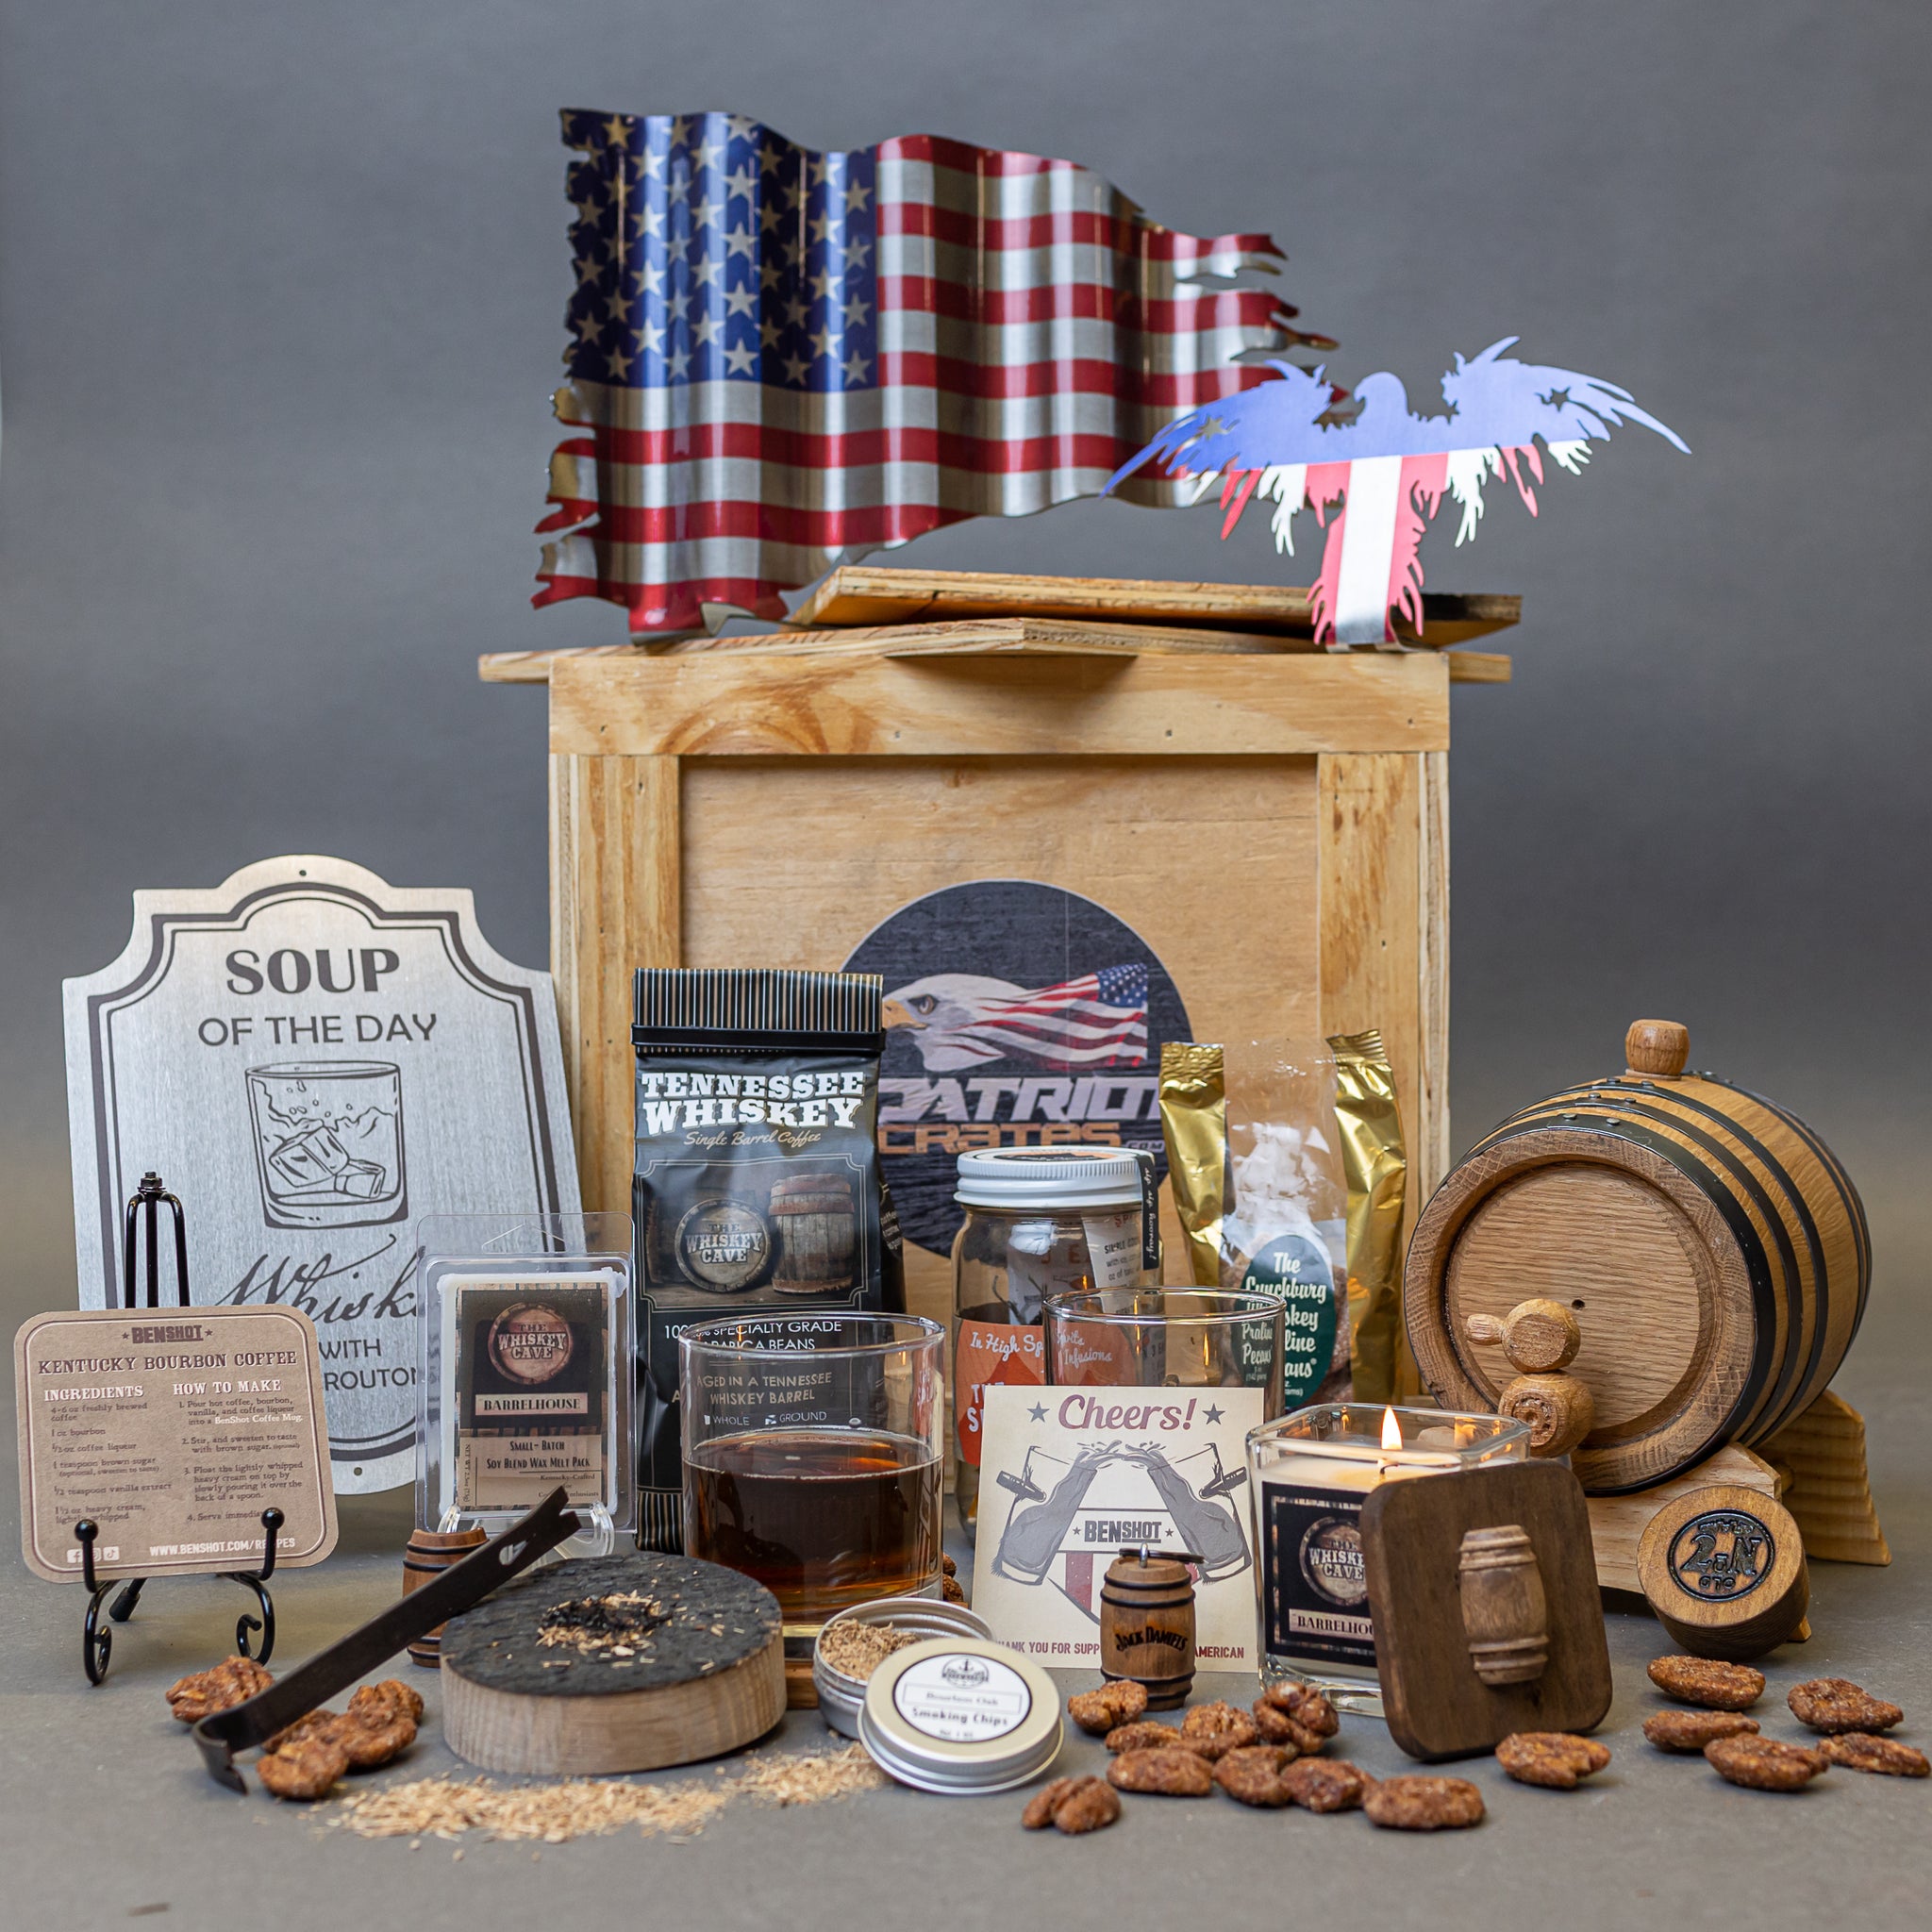 Make Your Own Whiskey Crate – Patriot Crates